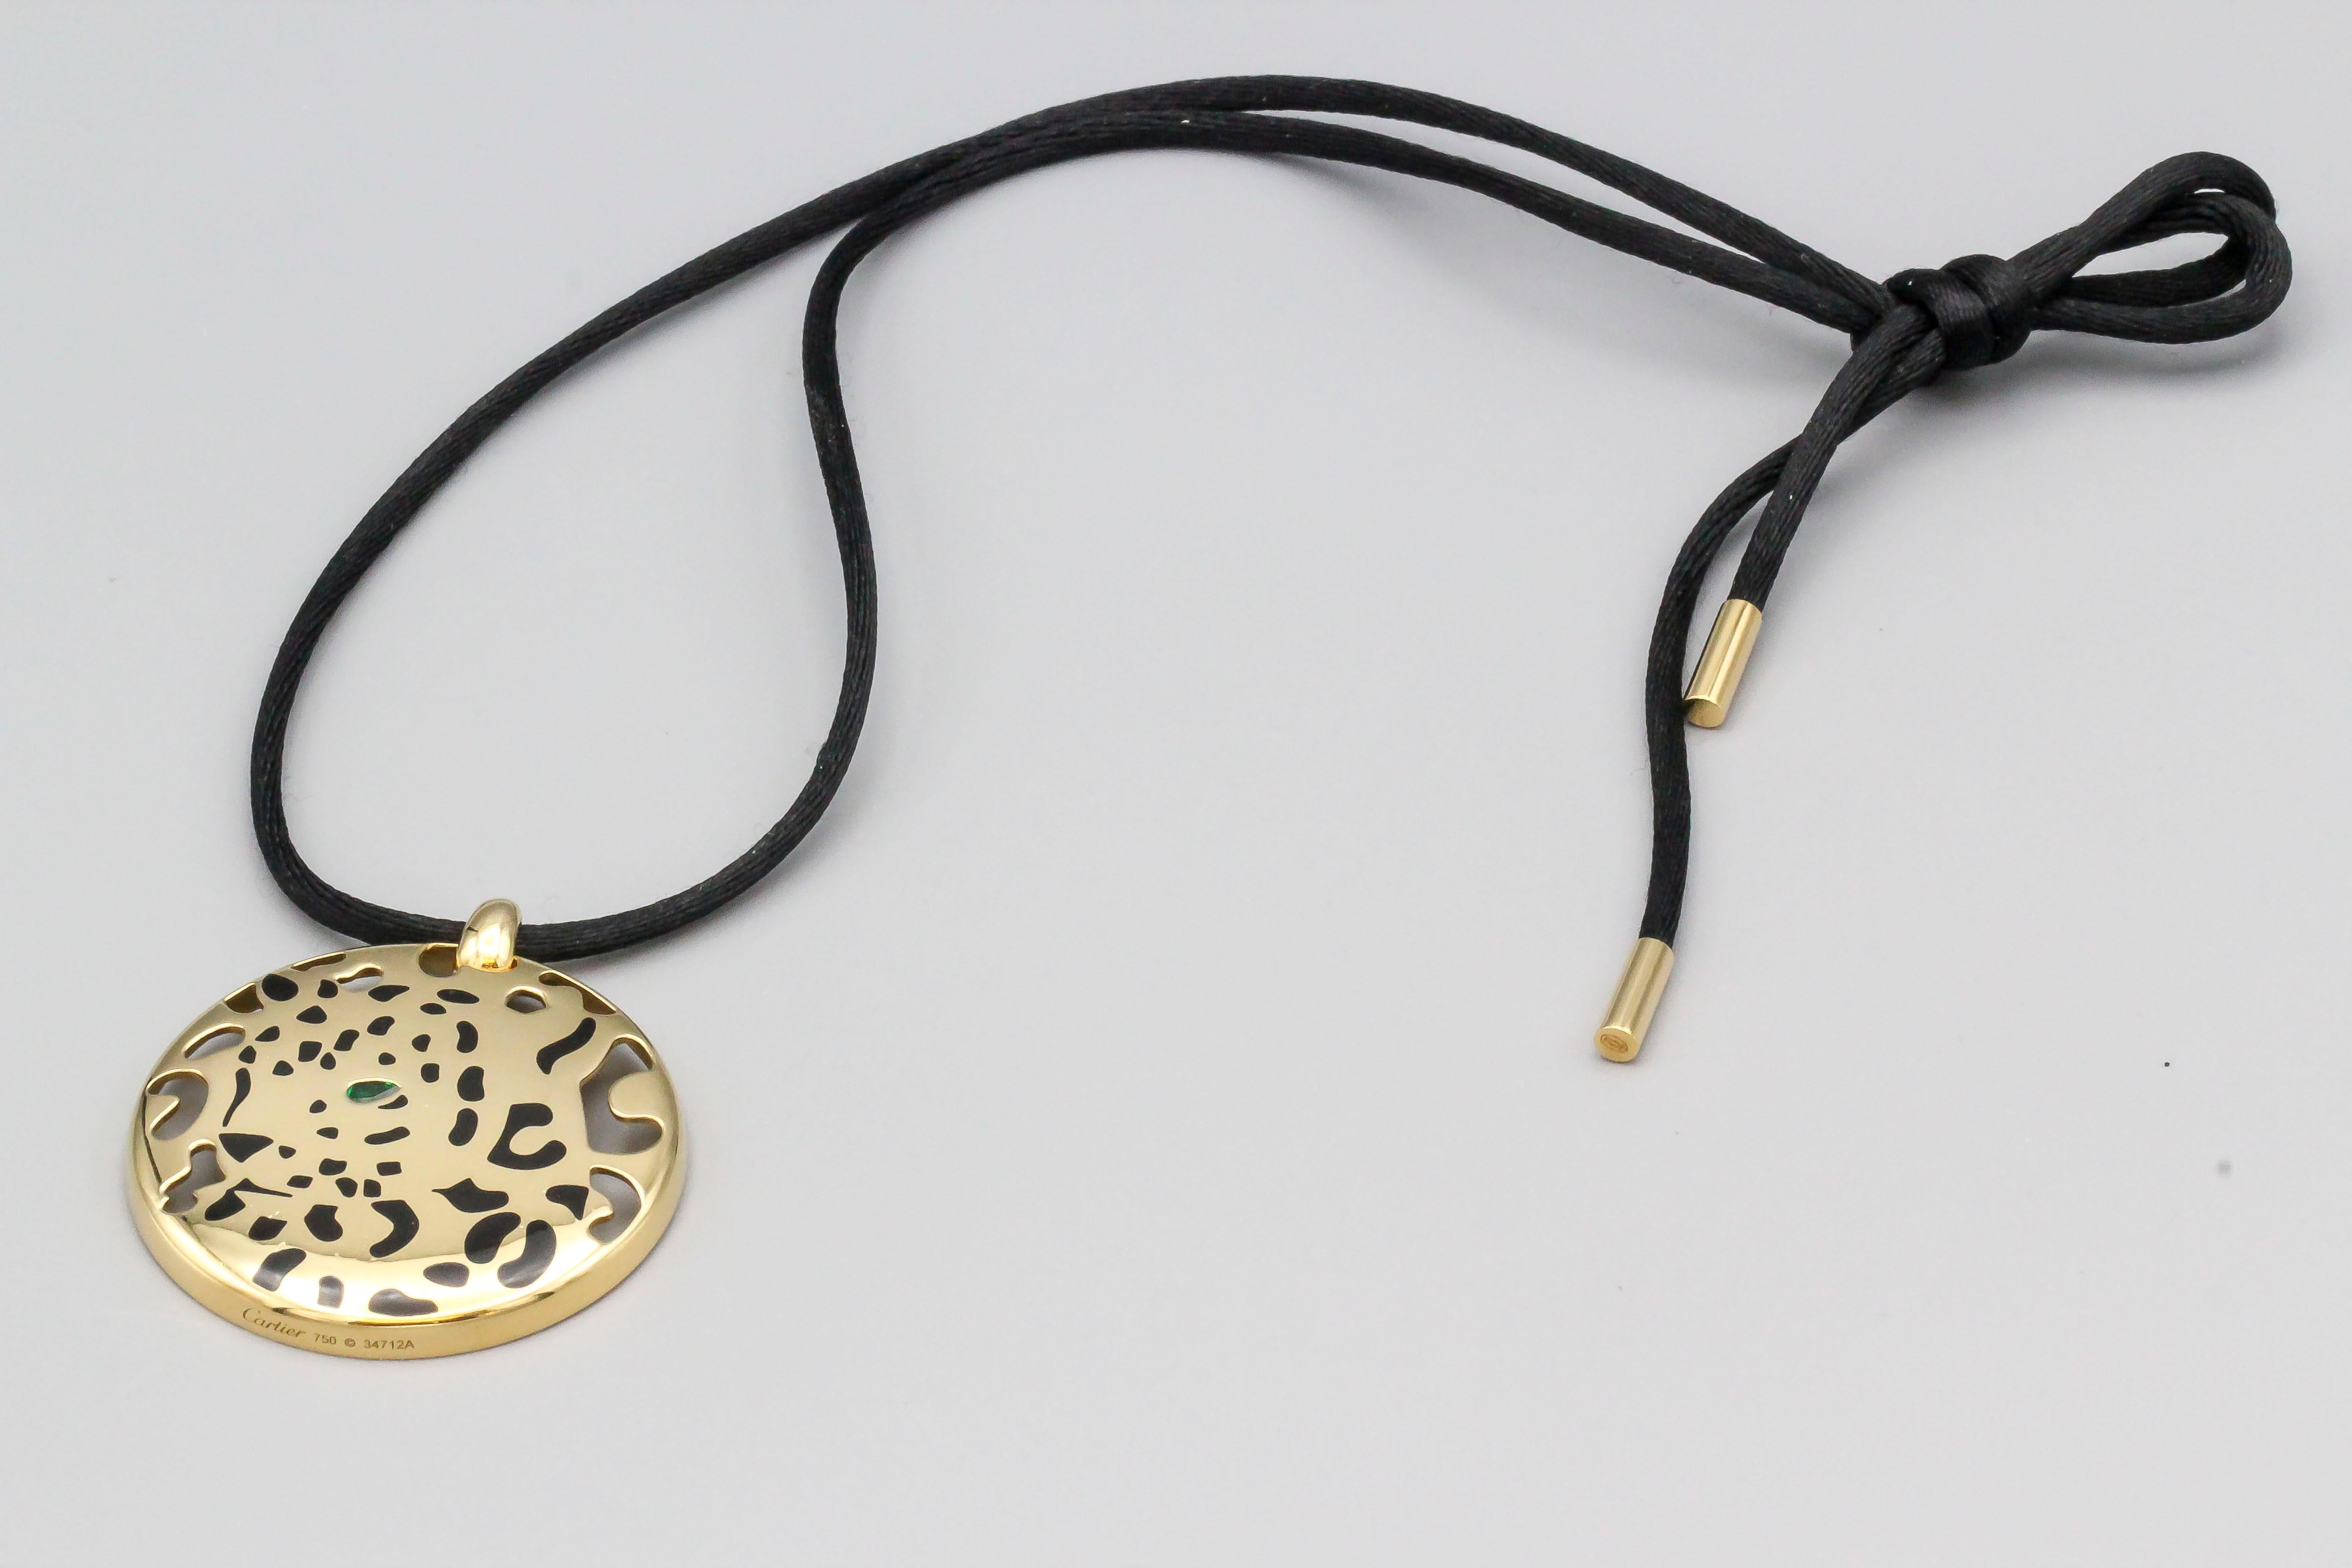 Interesting emerald, black lacquer and 18K yellow gold pendant necklace from the 